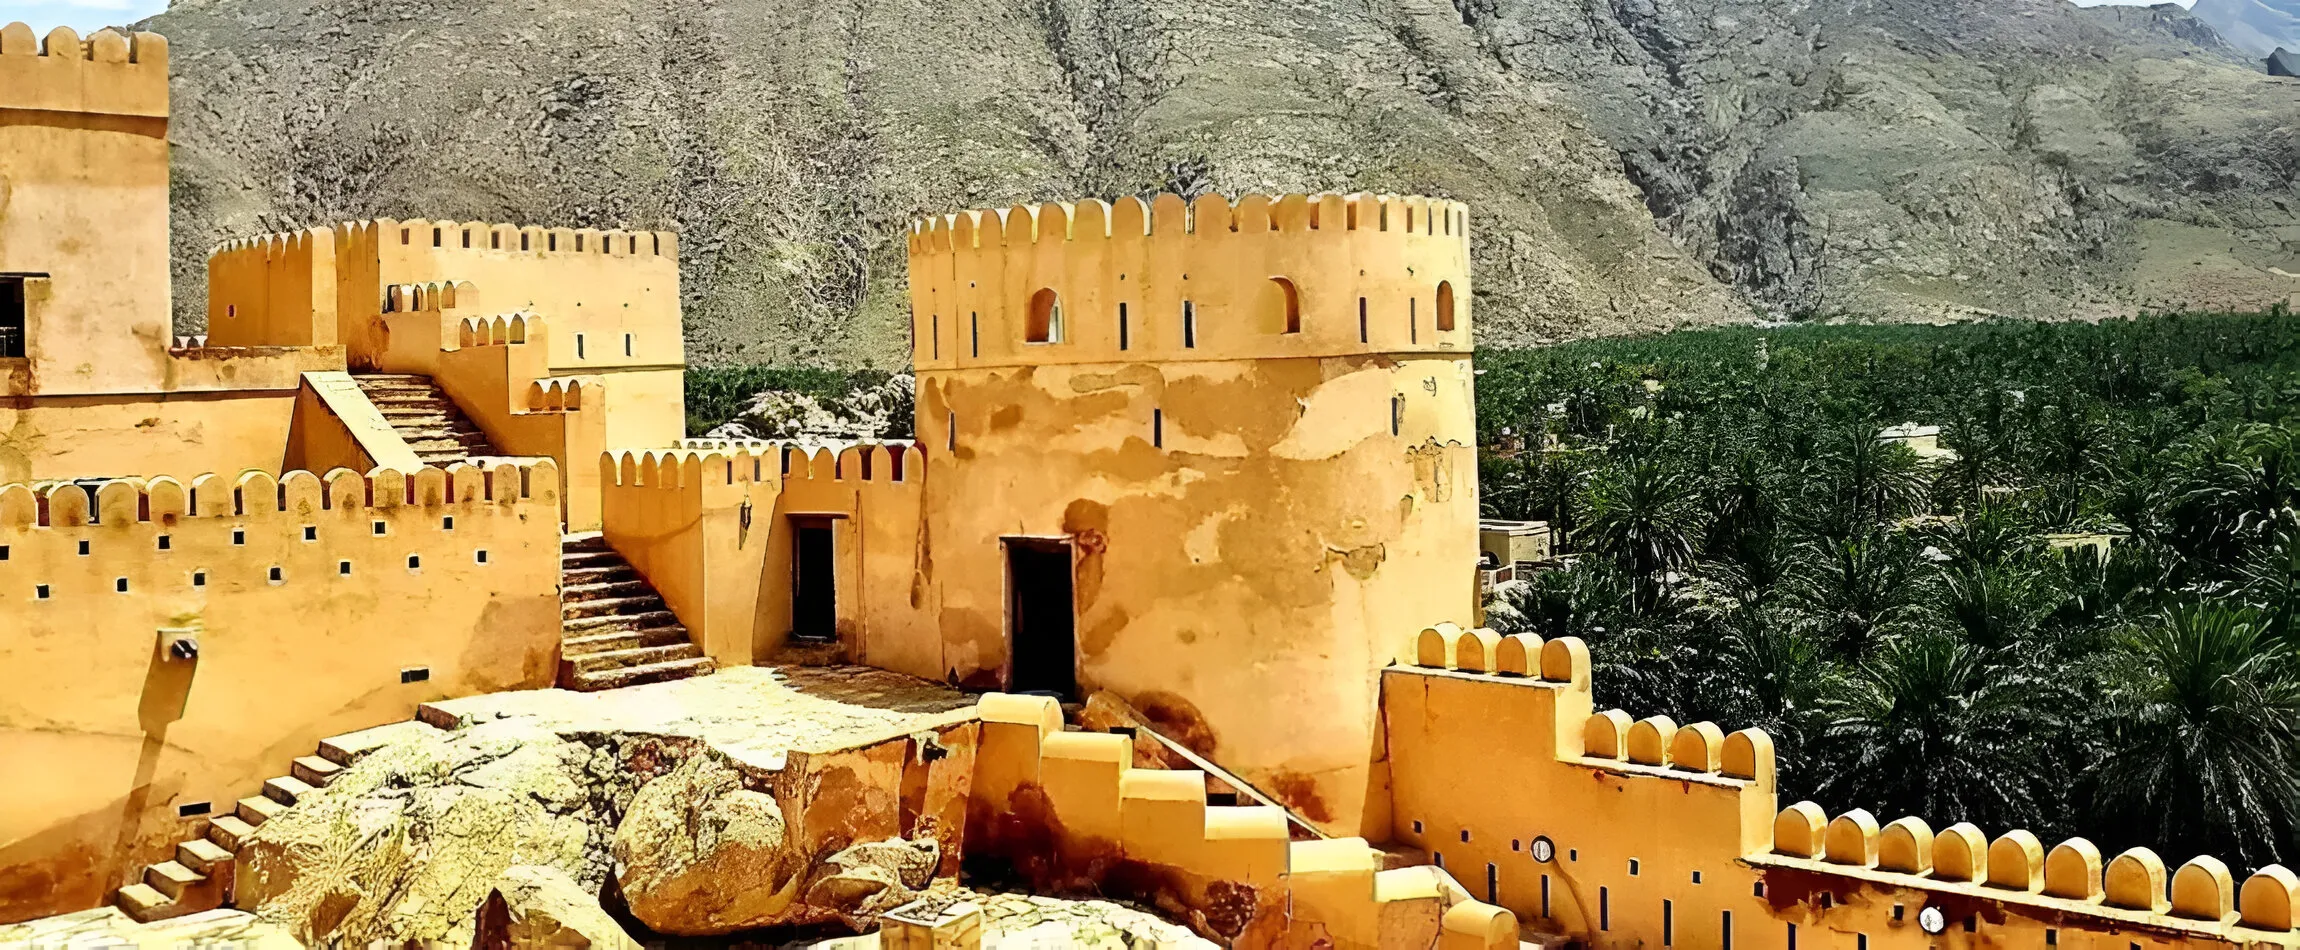 nakhal-soak Attractions in Oman